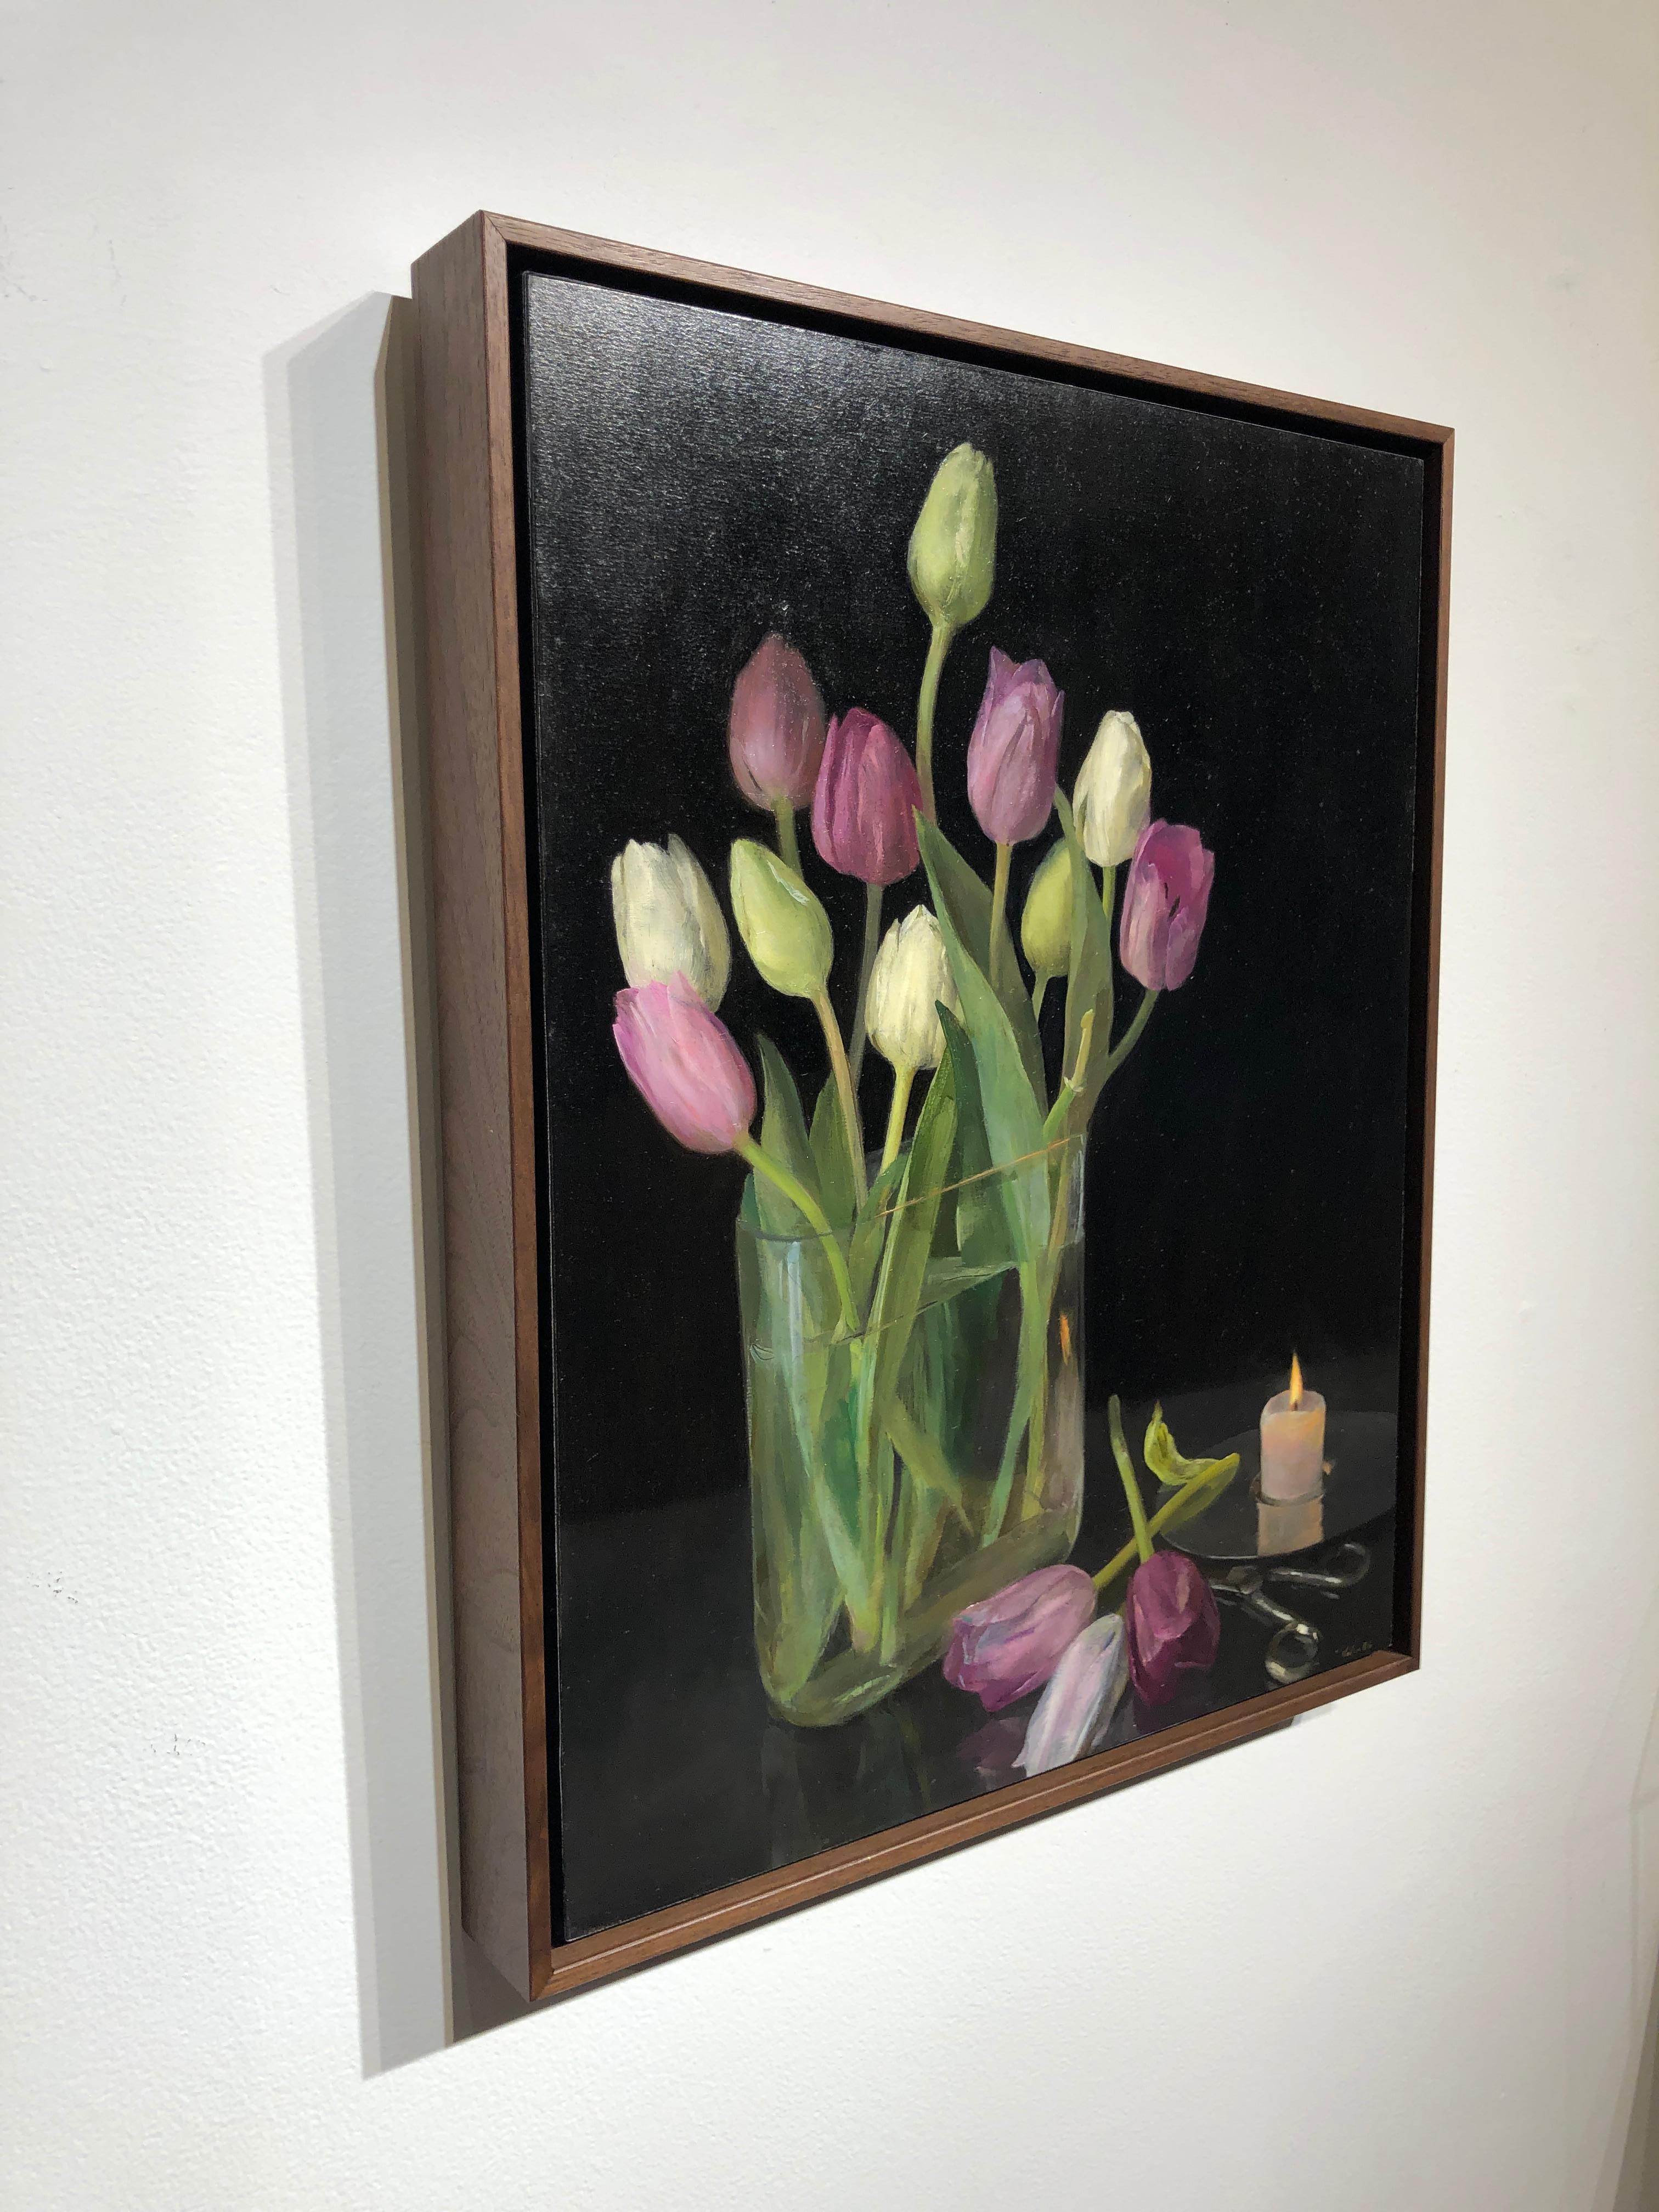 Still Life with Tulips, Glass Vase of Pastel Tulips, Scissors & Burning Candle - Black Still-Life Painting by Helen Oh